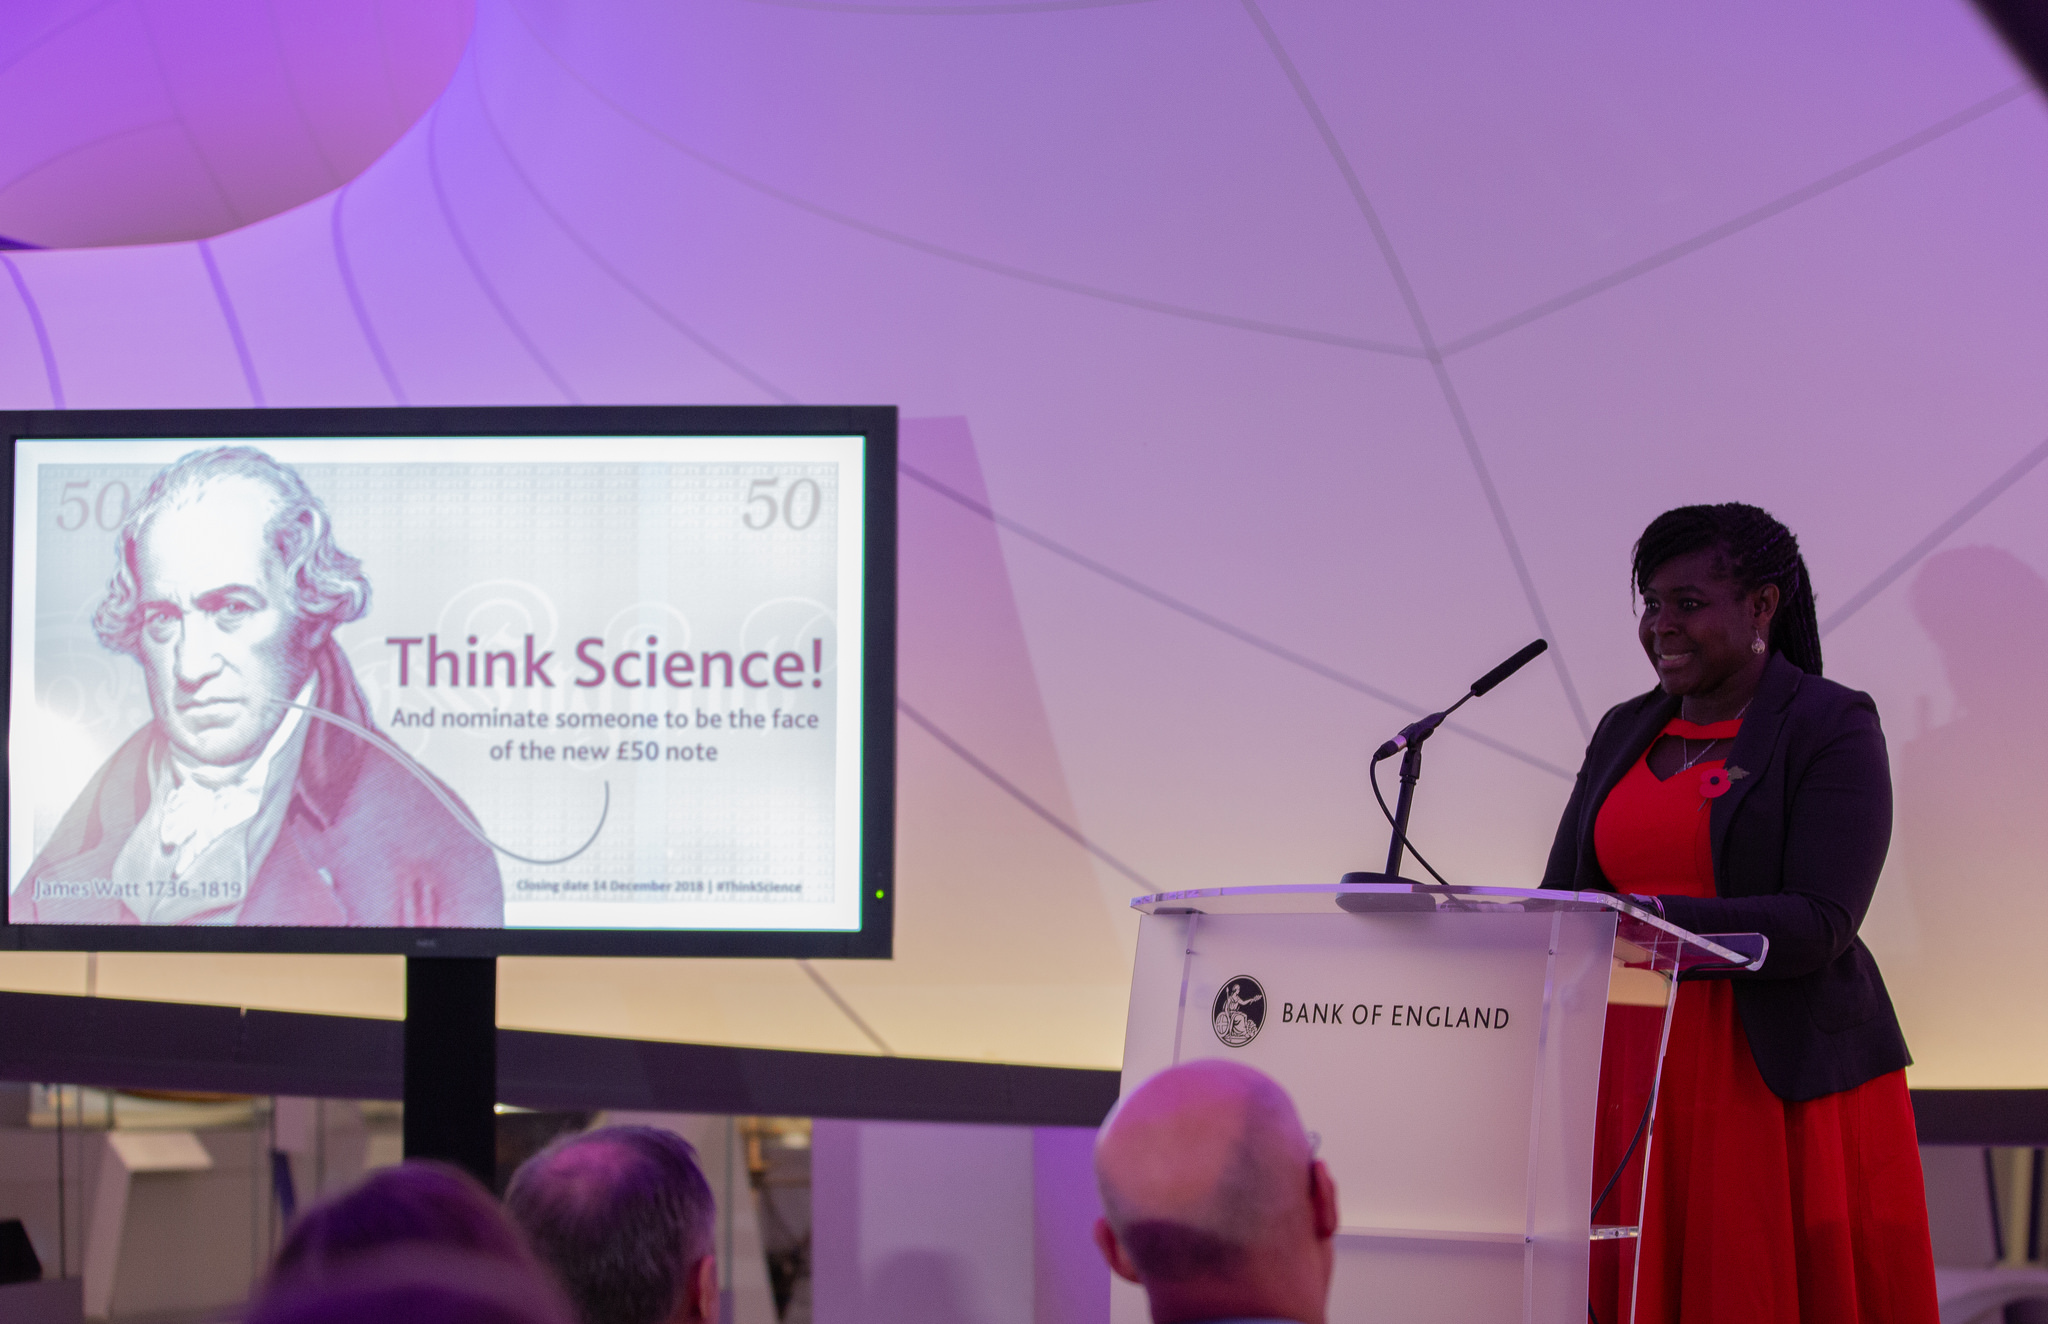 Dr Maggie Aderin-Pocock speaking at the Science Museum